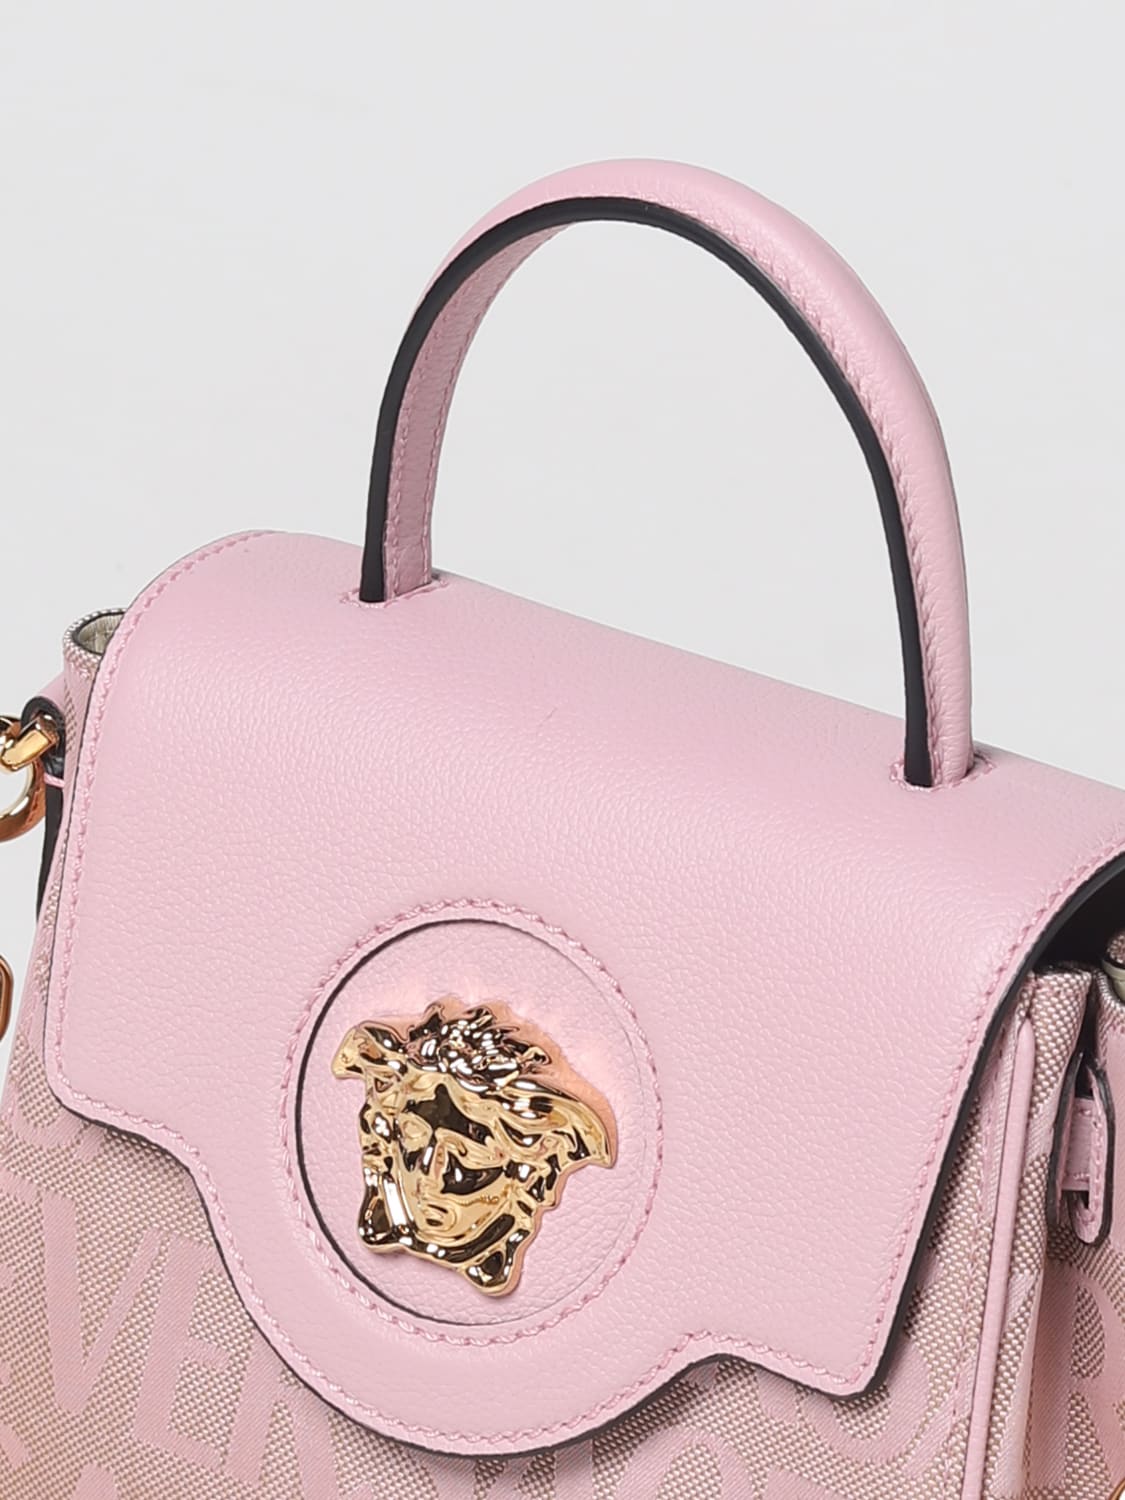 Versace - Authenticated La Medusa Handbag - Leather Pink for Women, Never Worn, with Tag